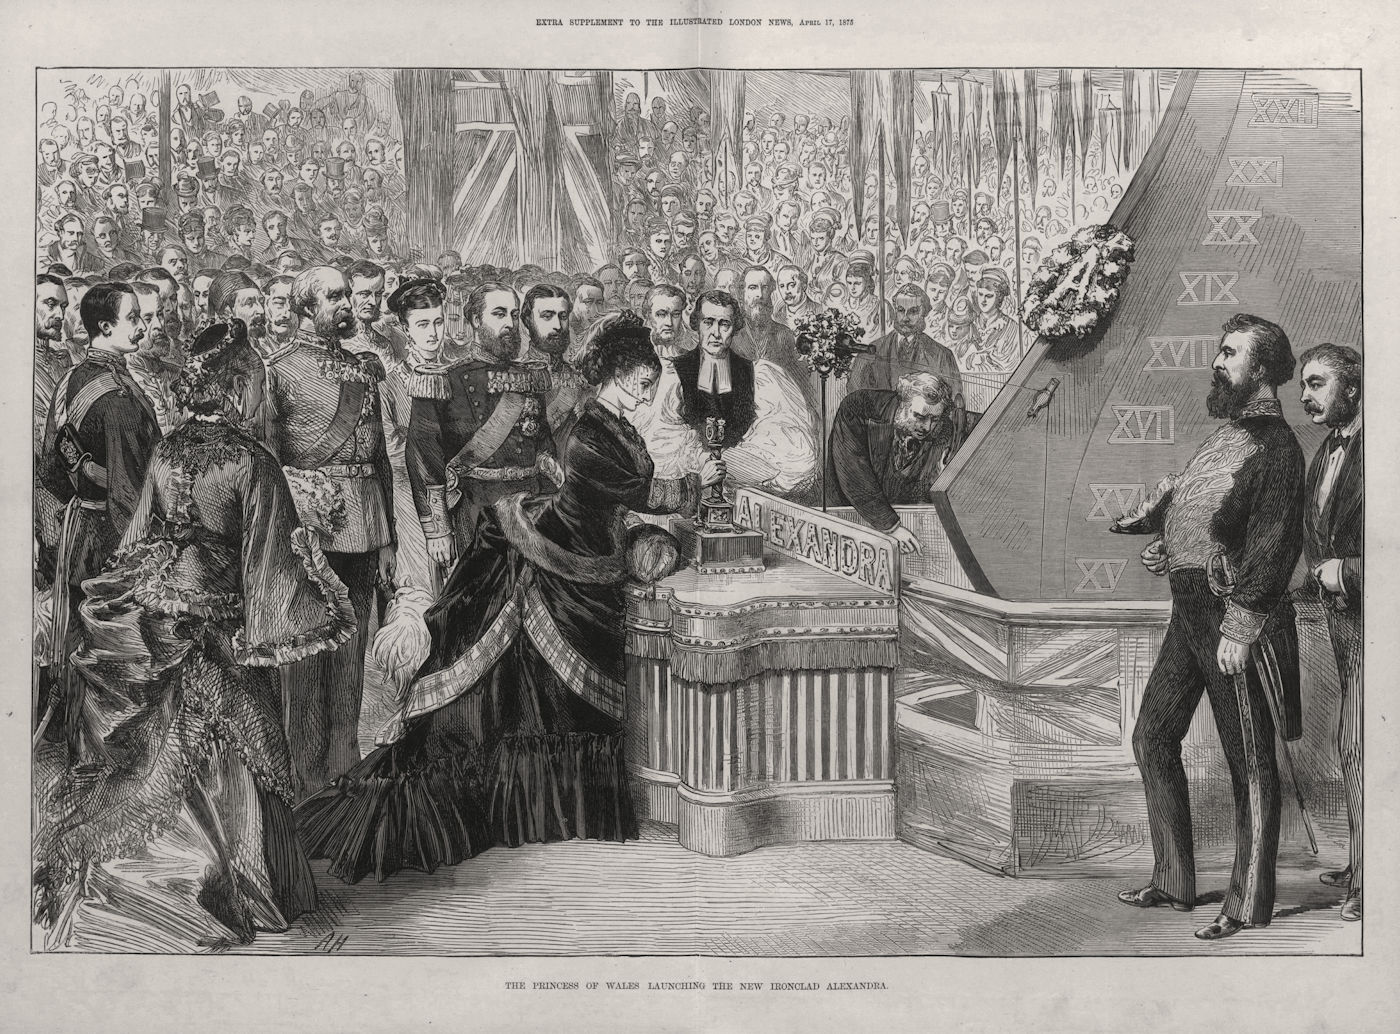 Associate Product The Princess of Wales launching the new ironclad Alexandra. Chatham. Ships 1875